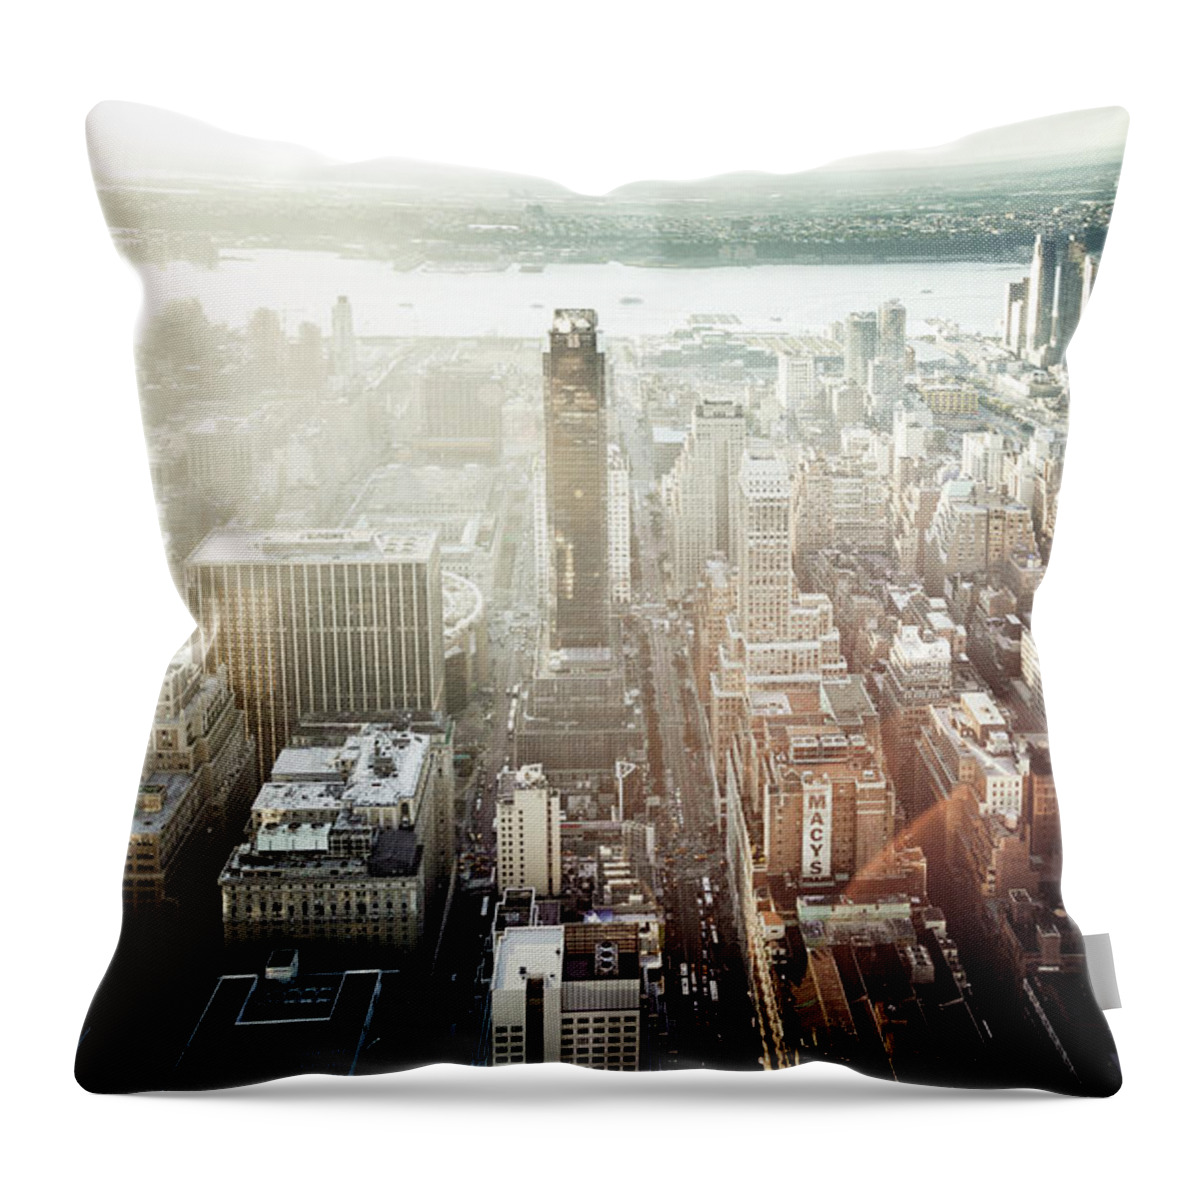 Macy's Throw Pillow featuring the photograph Sunset At Macy's by RicharD Murphy